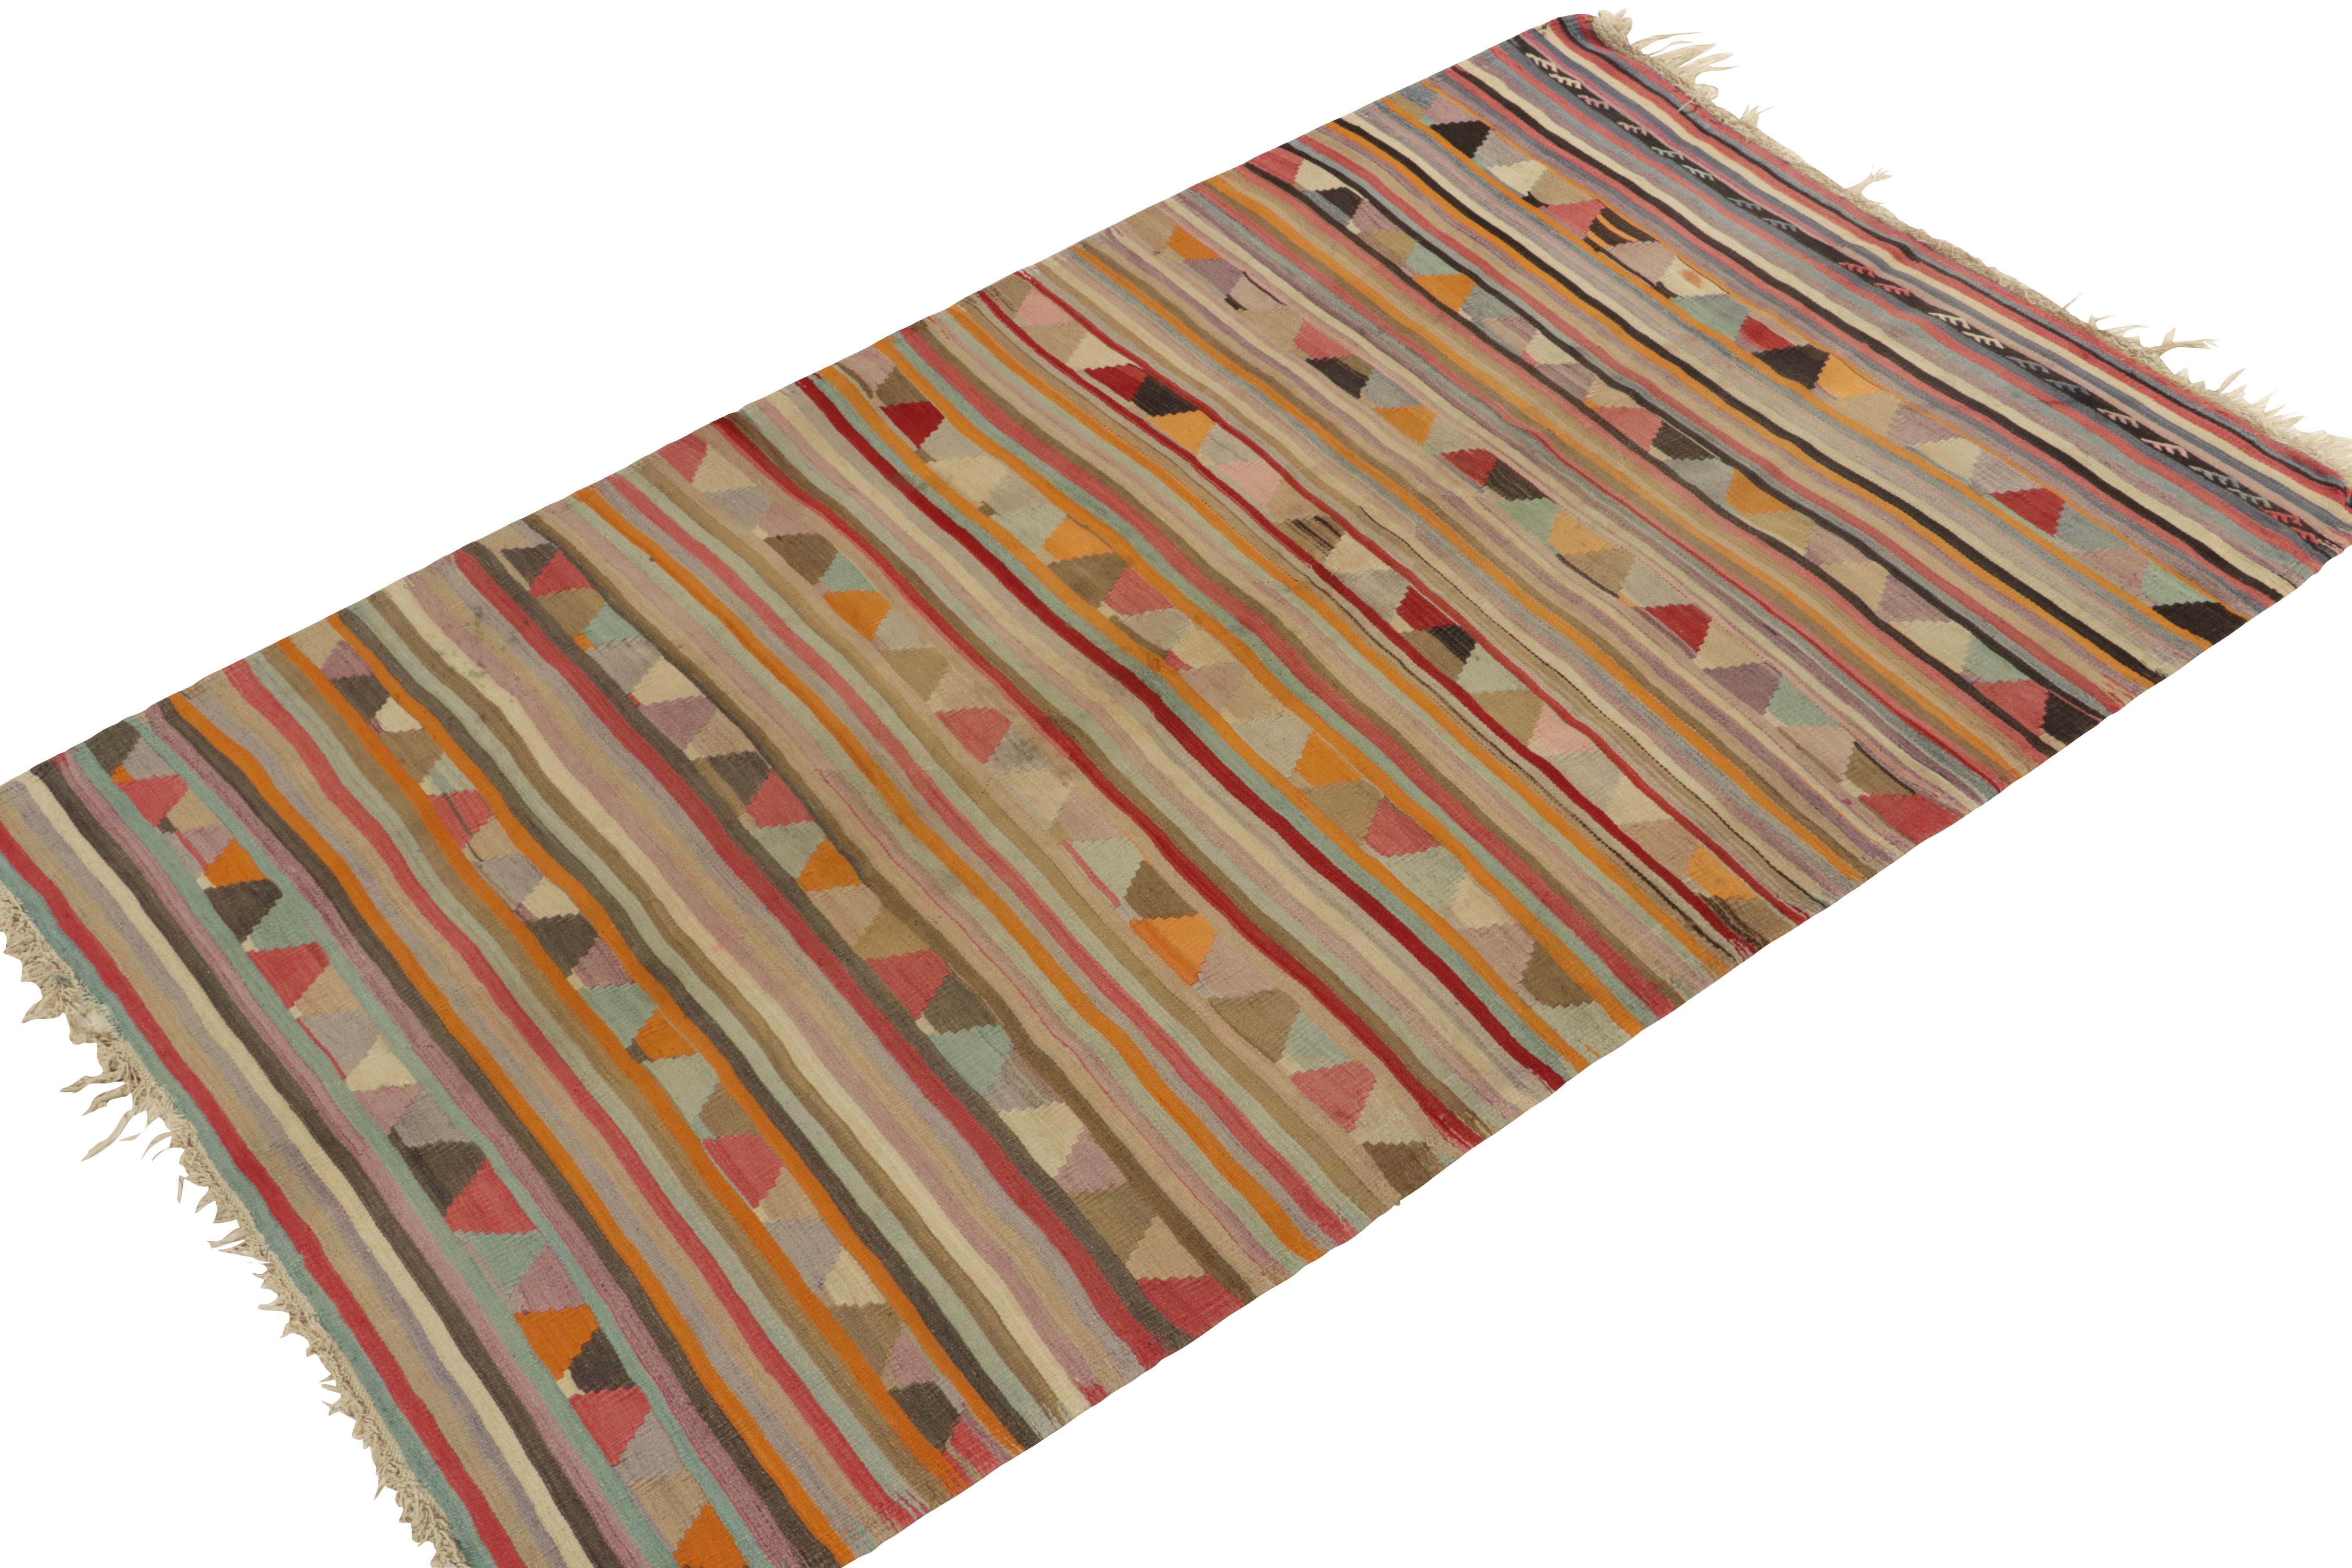 Hailing from Turkey circa 1950-1960, a 5x9 vintage kilim from Rug & Kilim’s most coveted mid-century curations. This particular rug plays a striped background with the most unusual, vibrant geometric patterns in gold-orange, pink, blue, and other